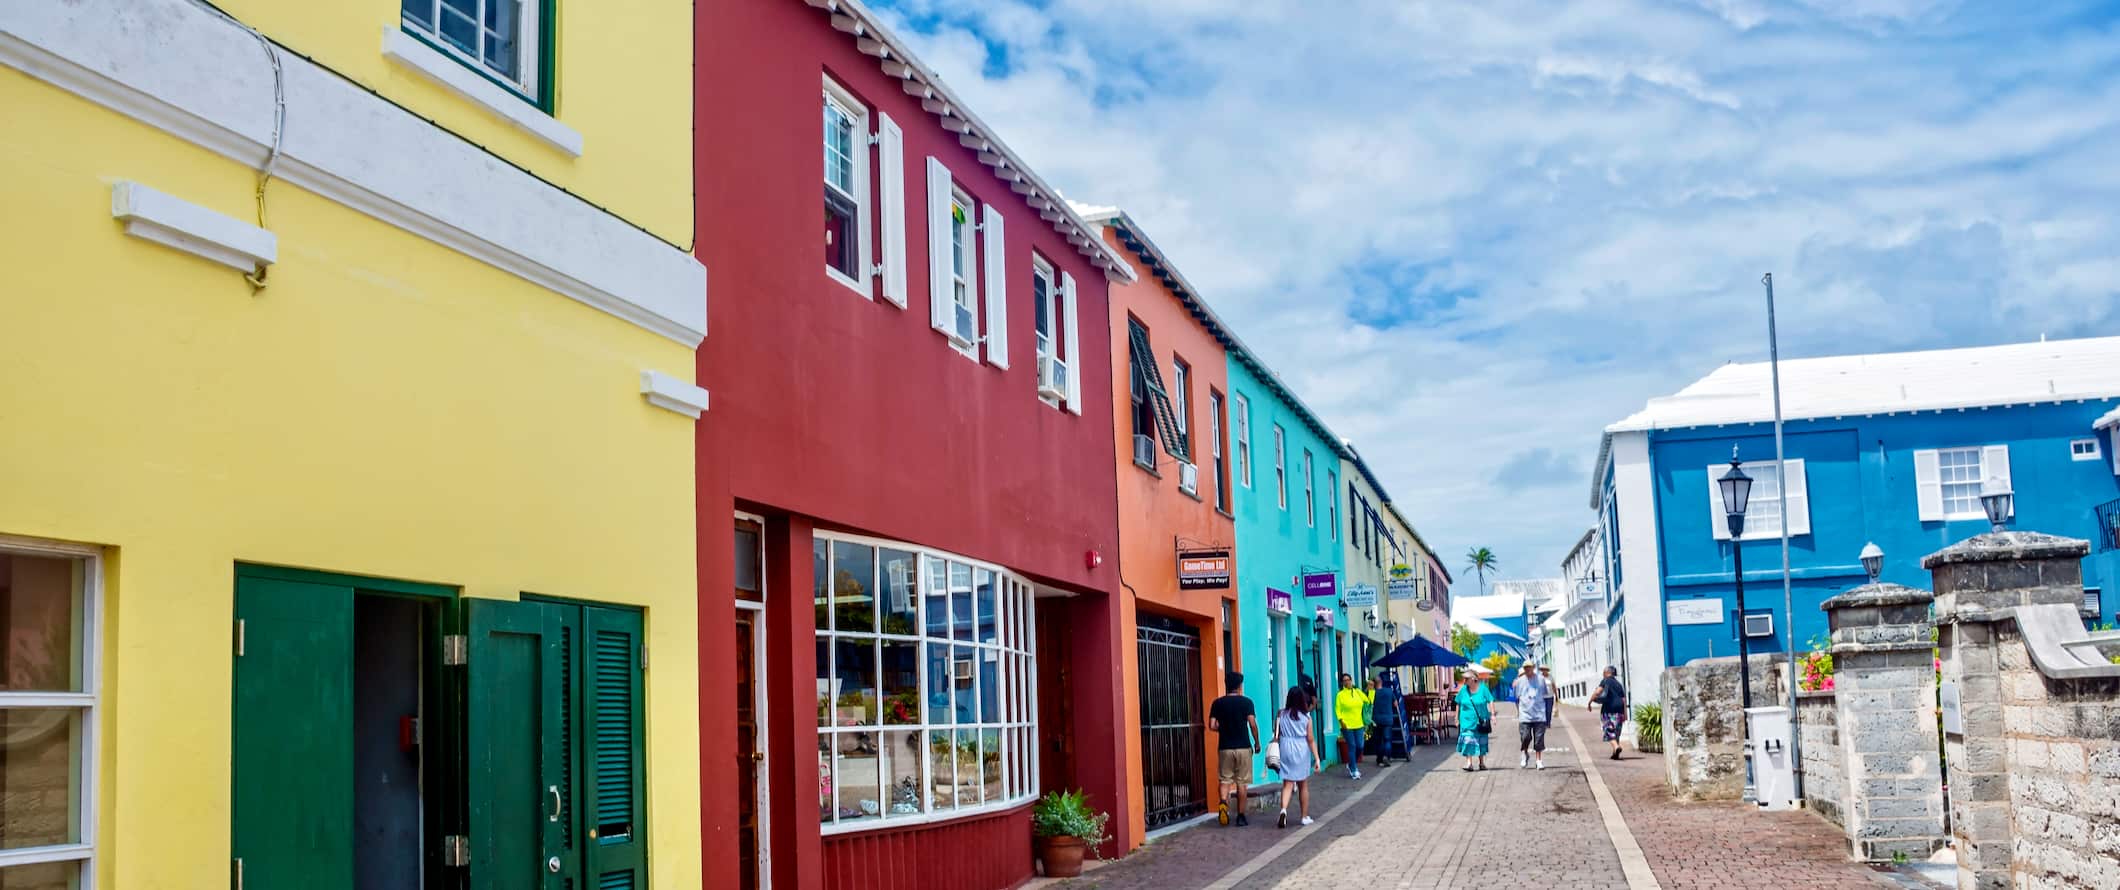 People walking down a pedestrianized street lined with brightly colored houses in Bermuda